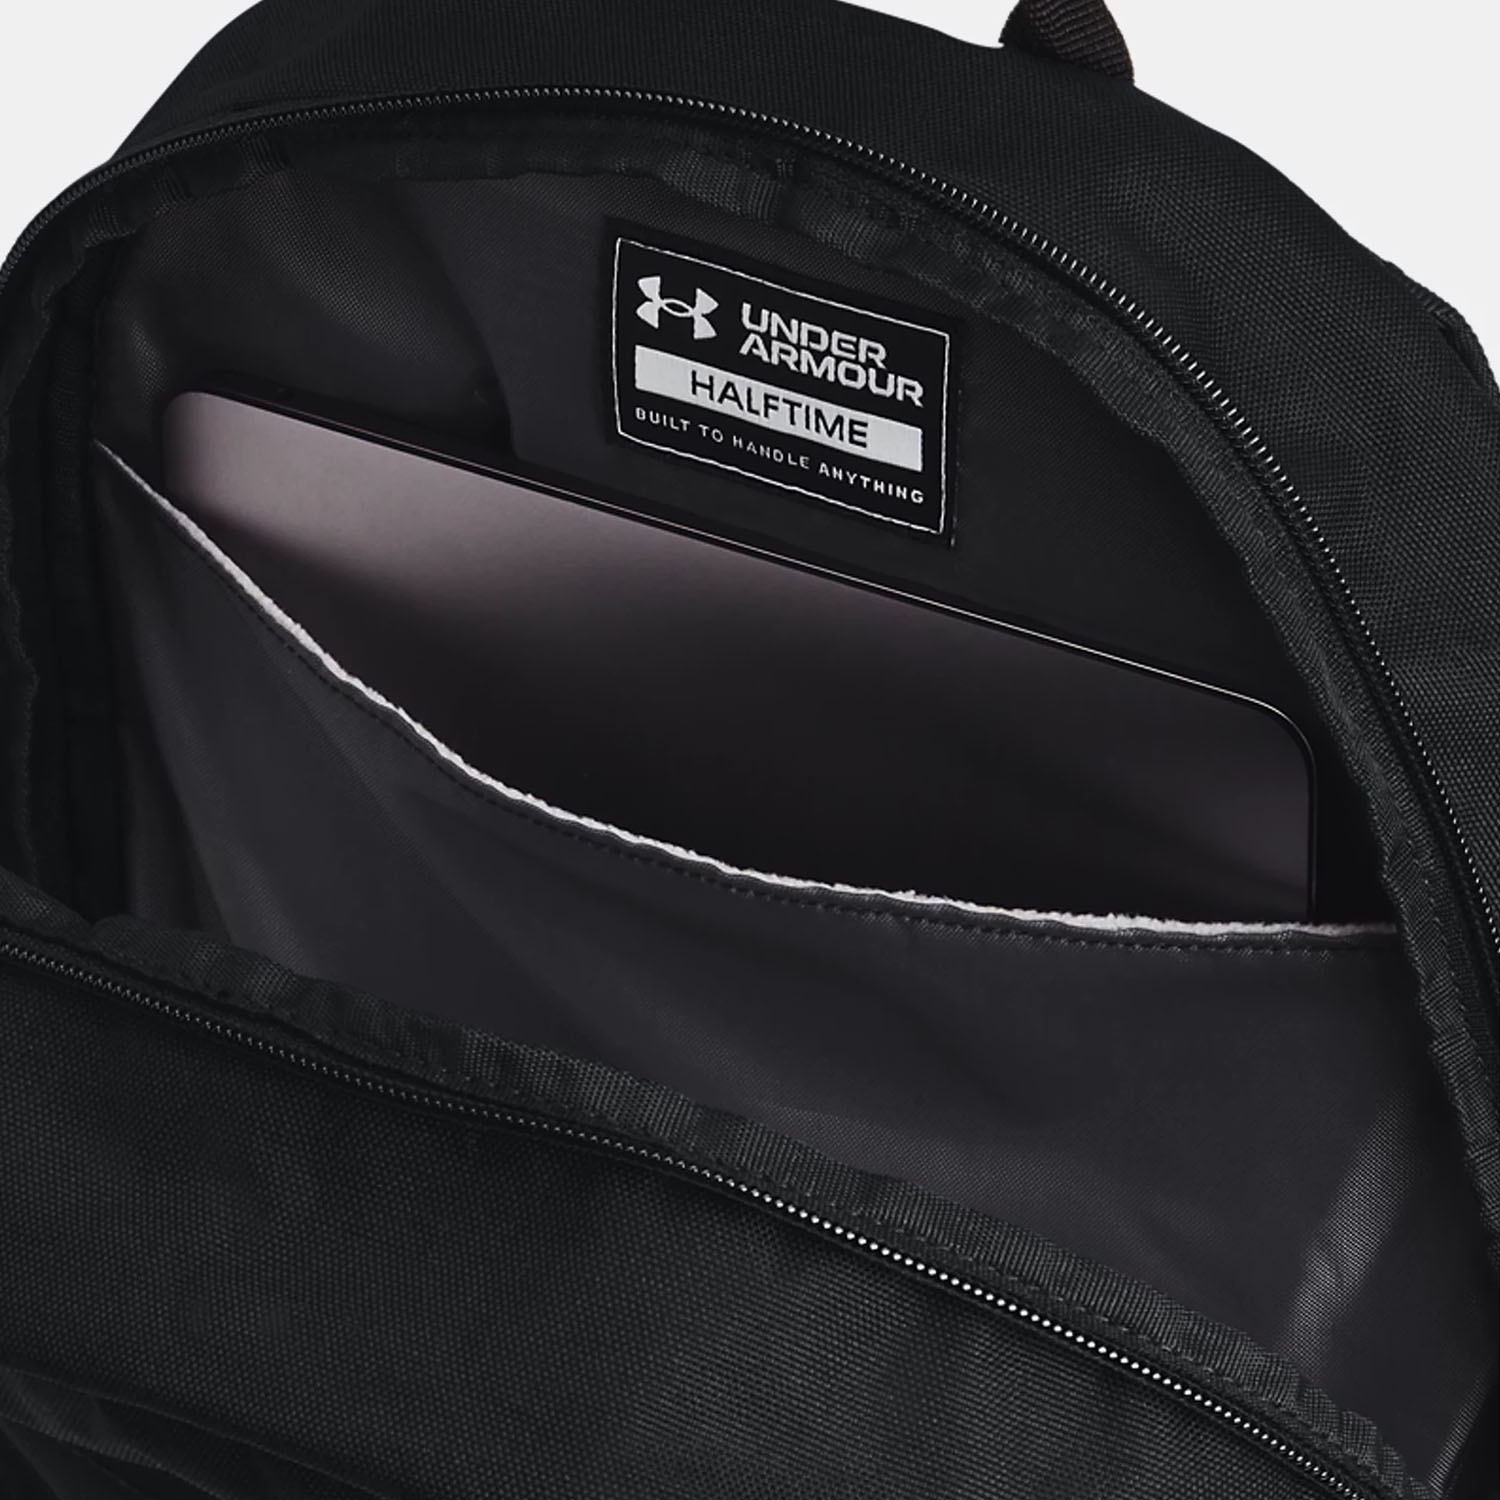 Under Armour Halftime Backpack - Black/White